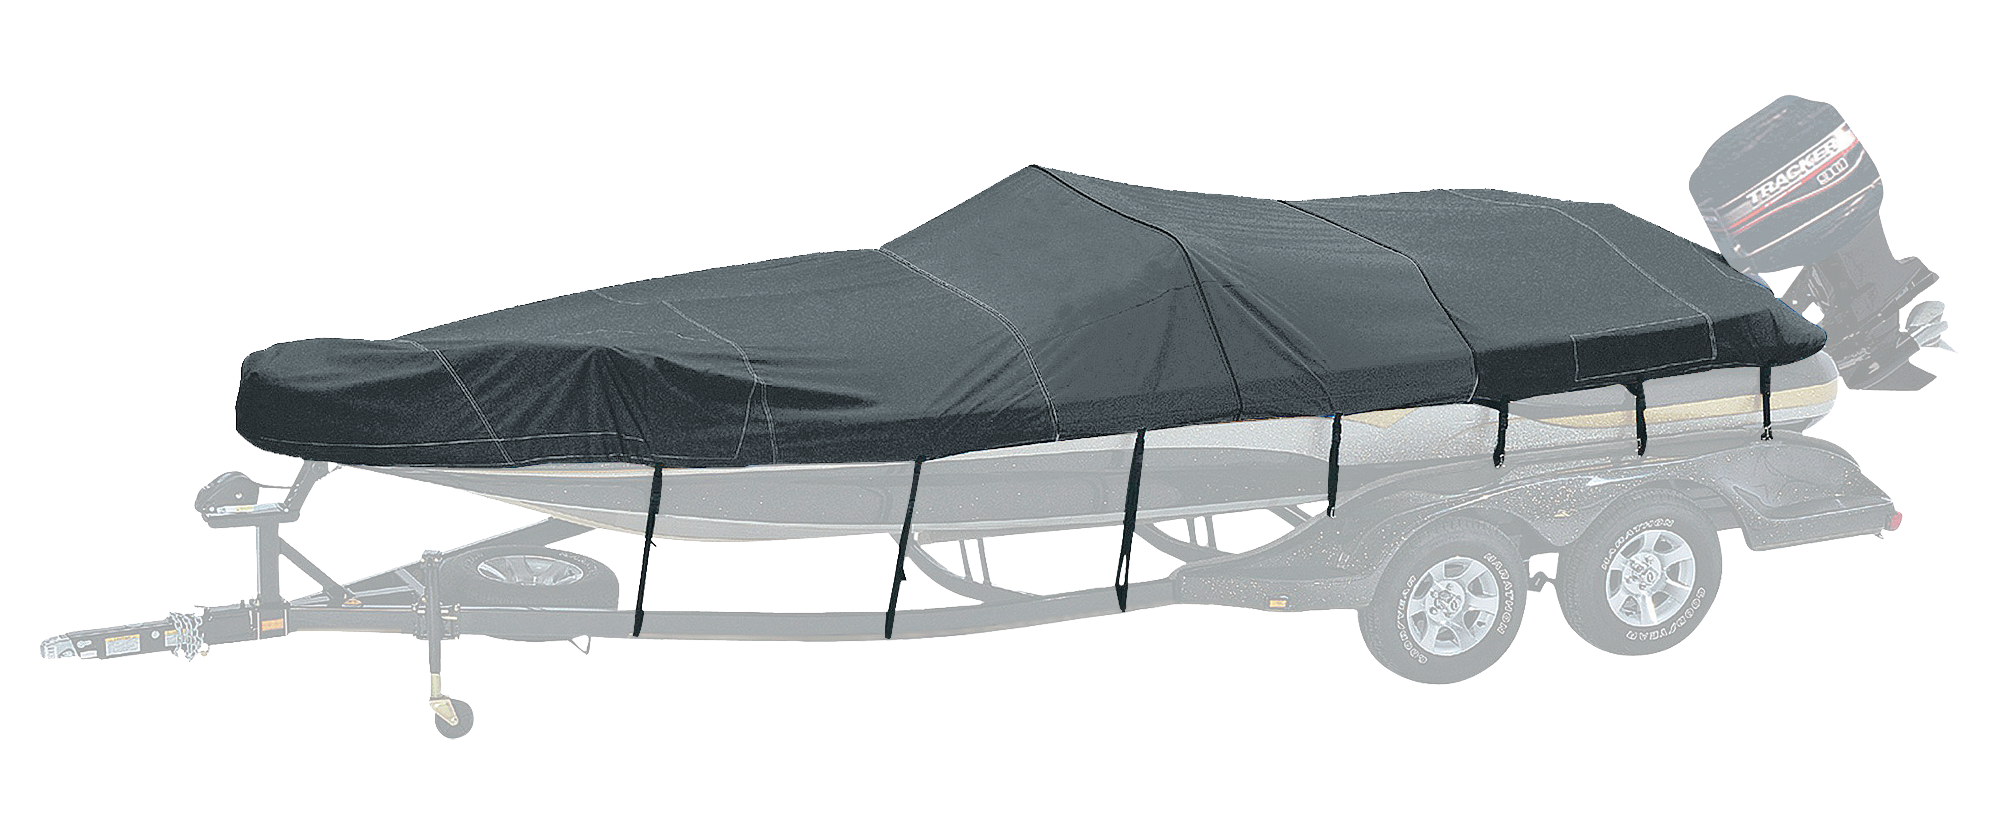 Bass Pro Shops Exact Fit Boat Cover by Westland - Tahoe Boats - 2005 204 Deckboat I/O - Charcoal